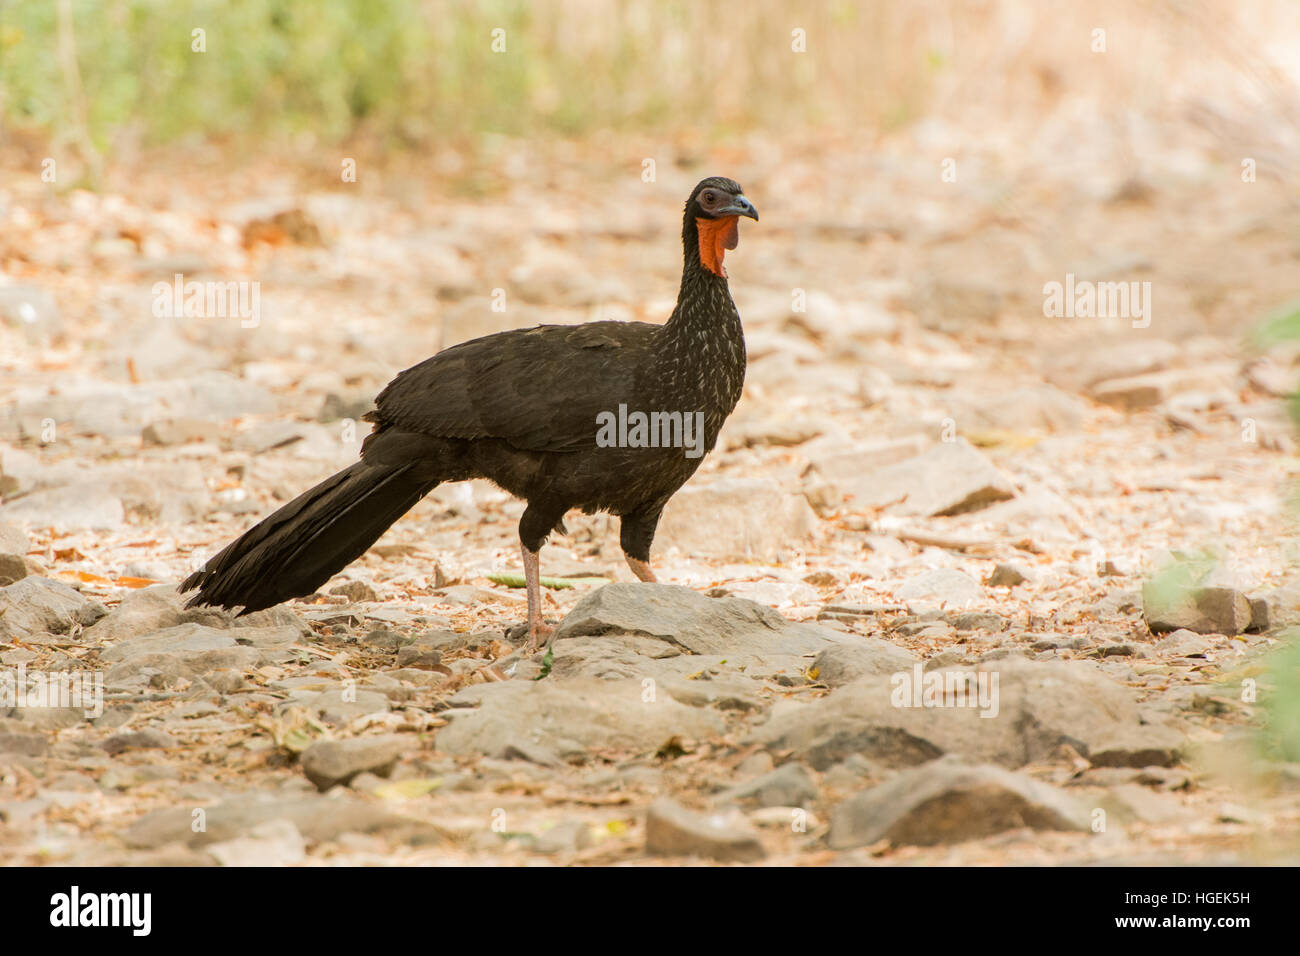 White-winged guan or Pava Aliblanca (Penelope albipennis) at the Chaparri Reserve in Lambayeque, northern Peru Stock Photo